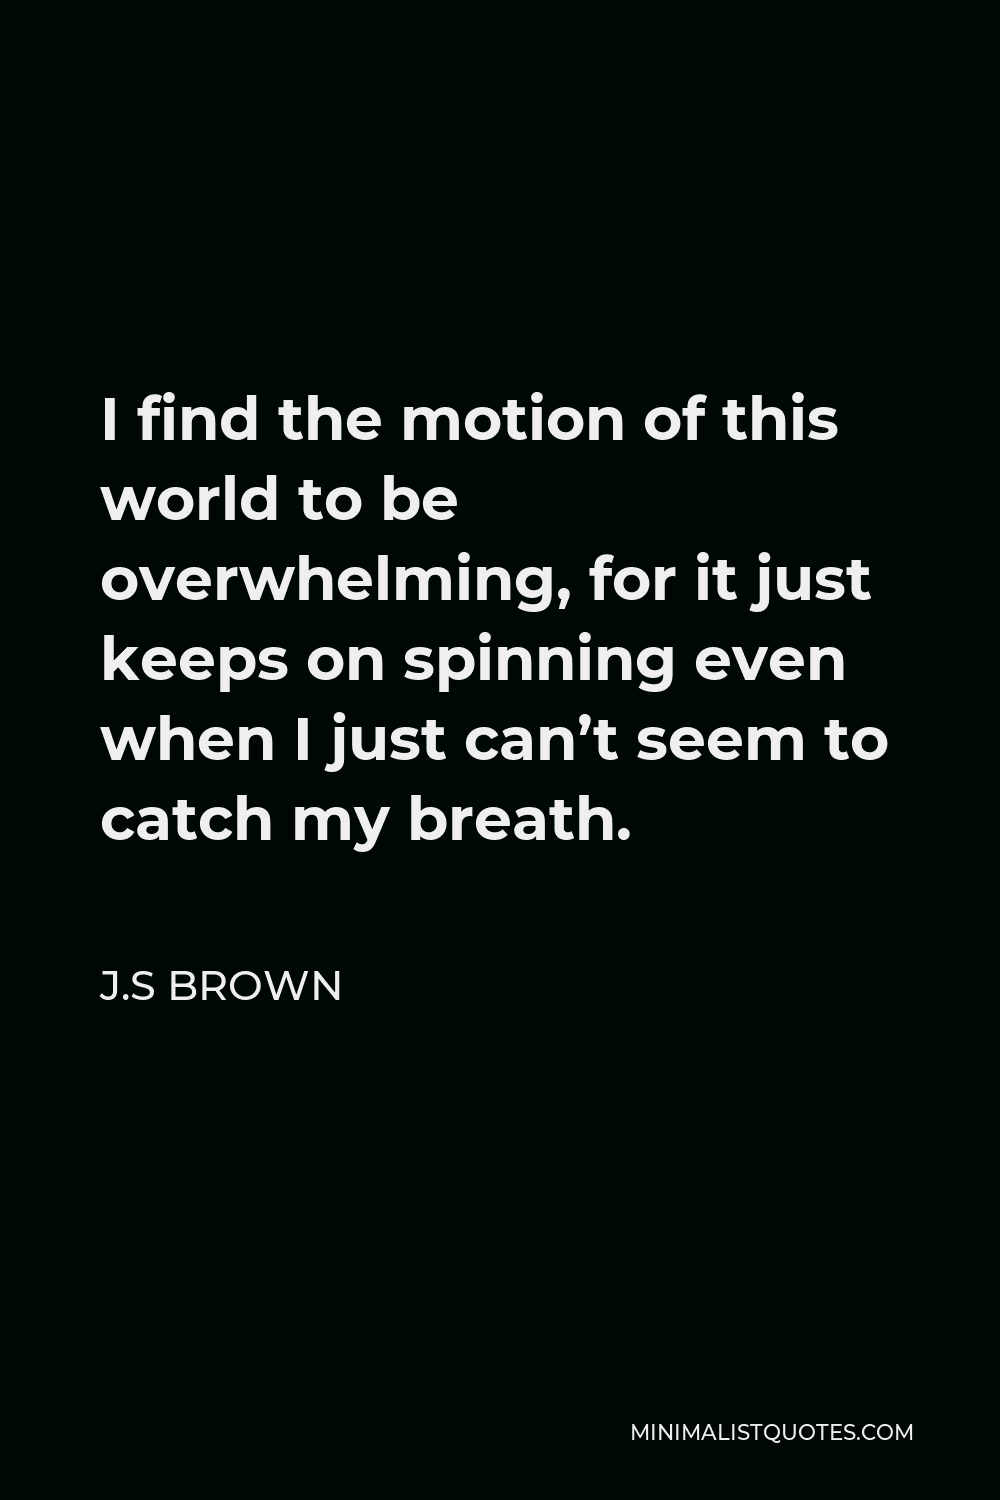 J.S Brown Quote - I find the motion of this world to be overwhelming, for it just keeps on spinning even when I just can’t seem to catch my breath.